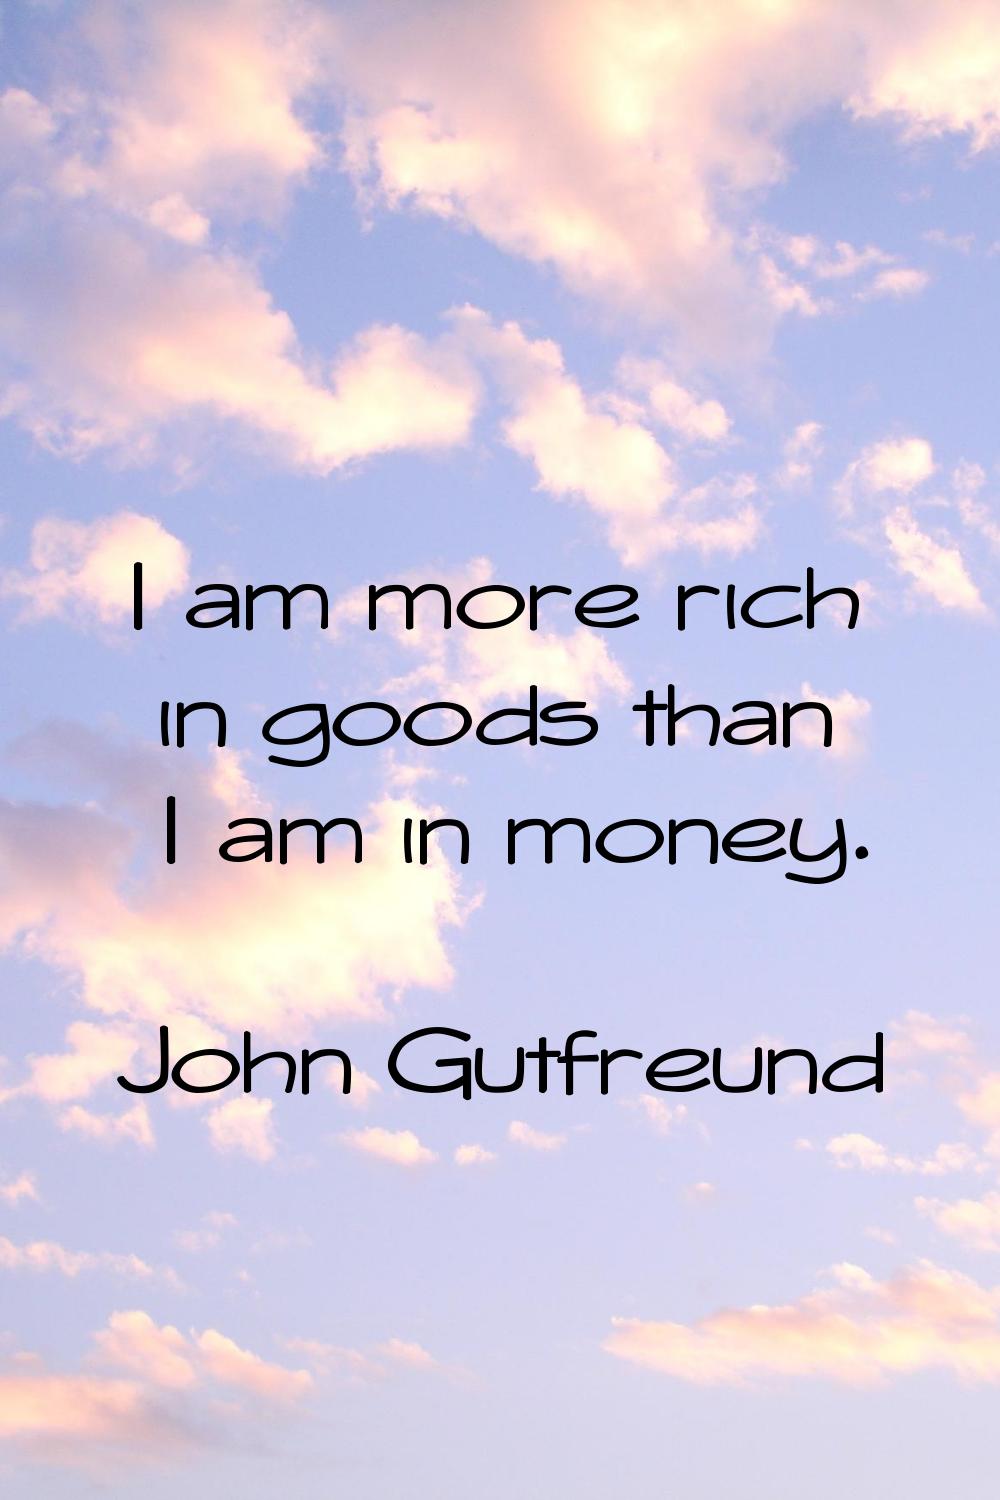 I am more rich in goods than I am in money.